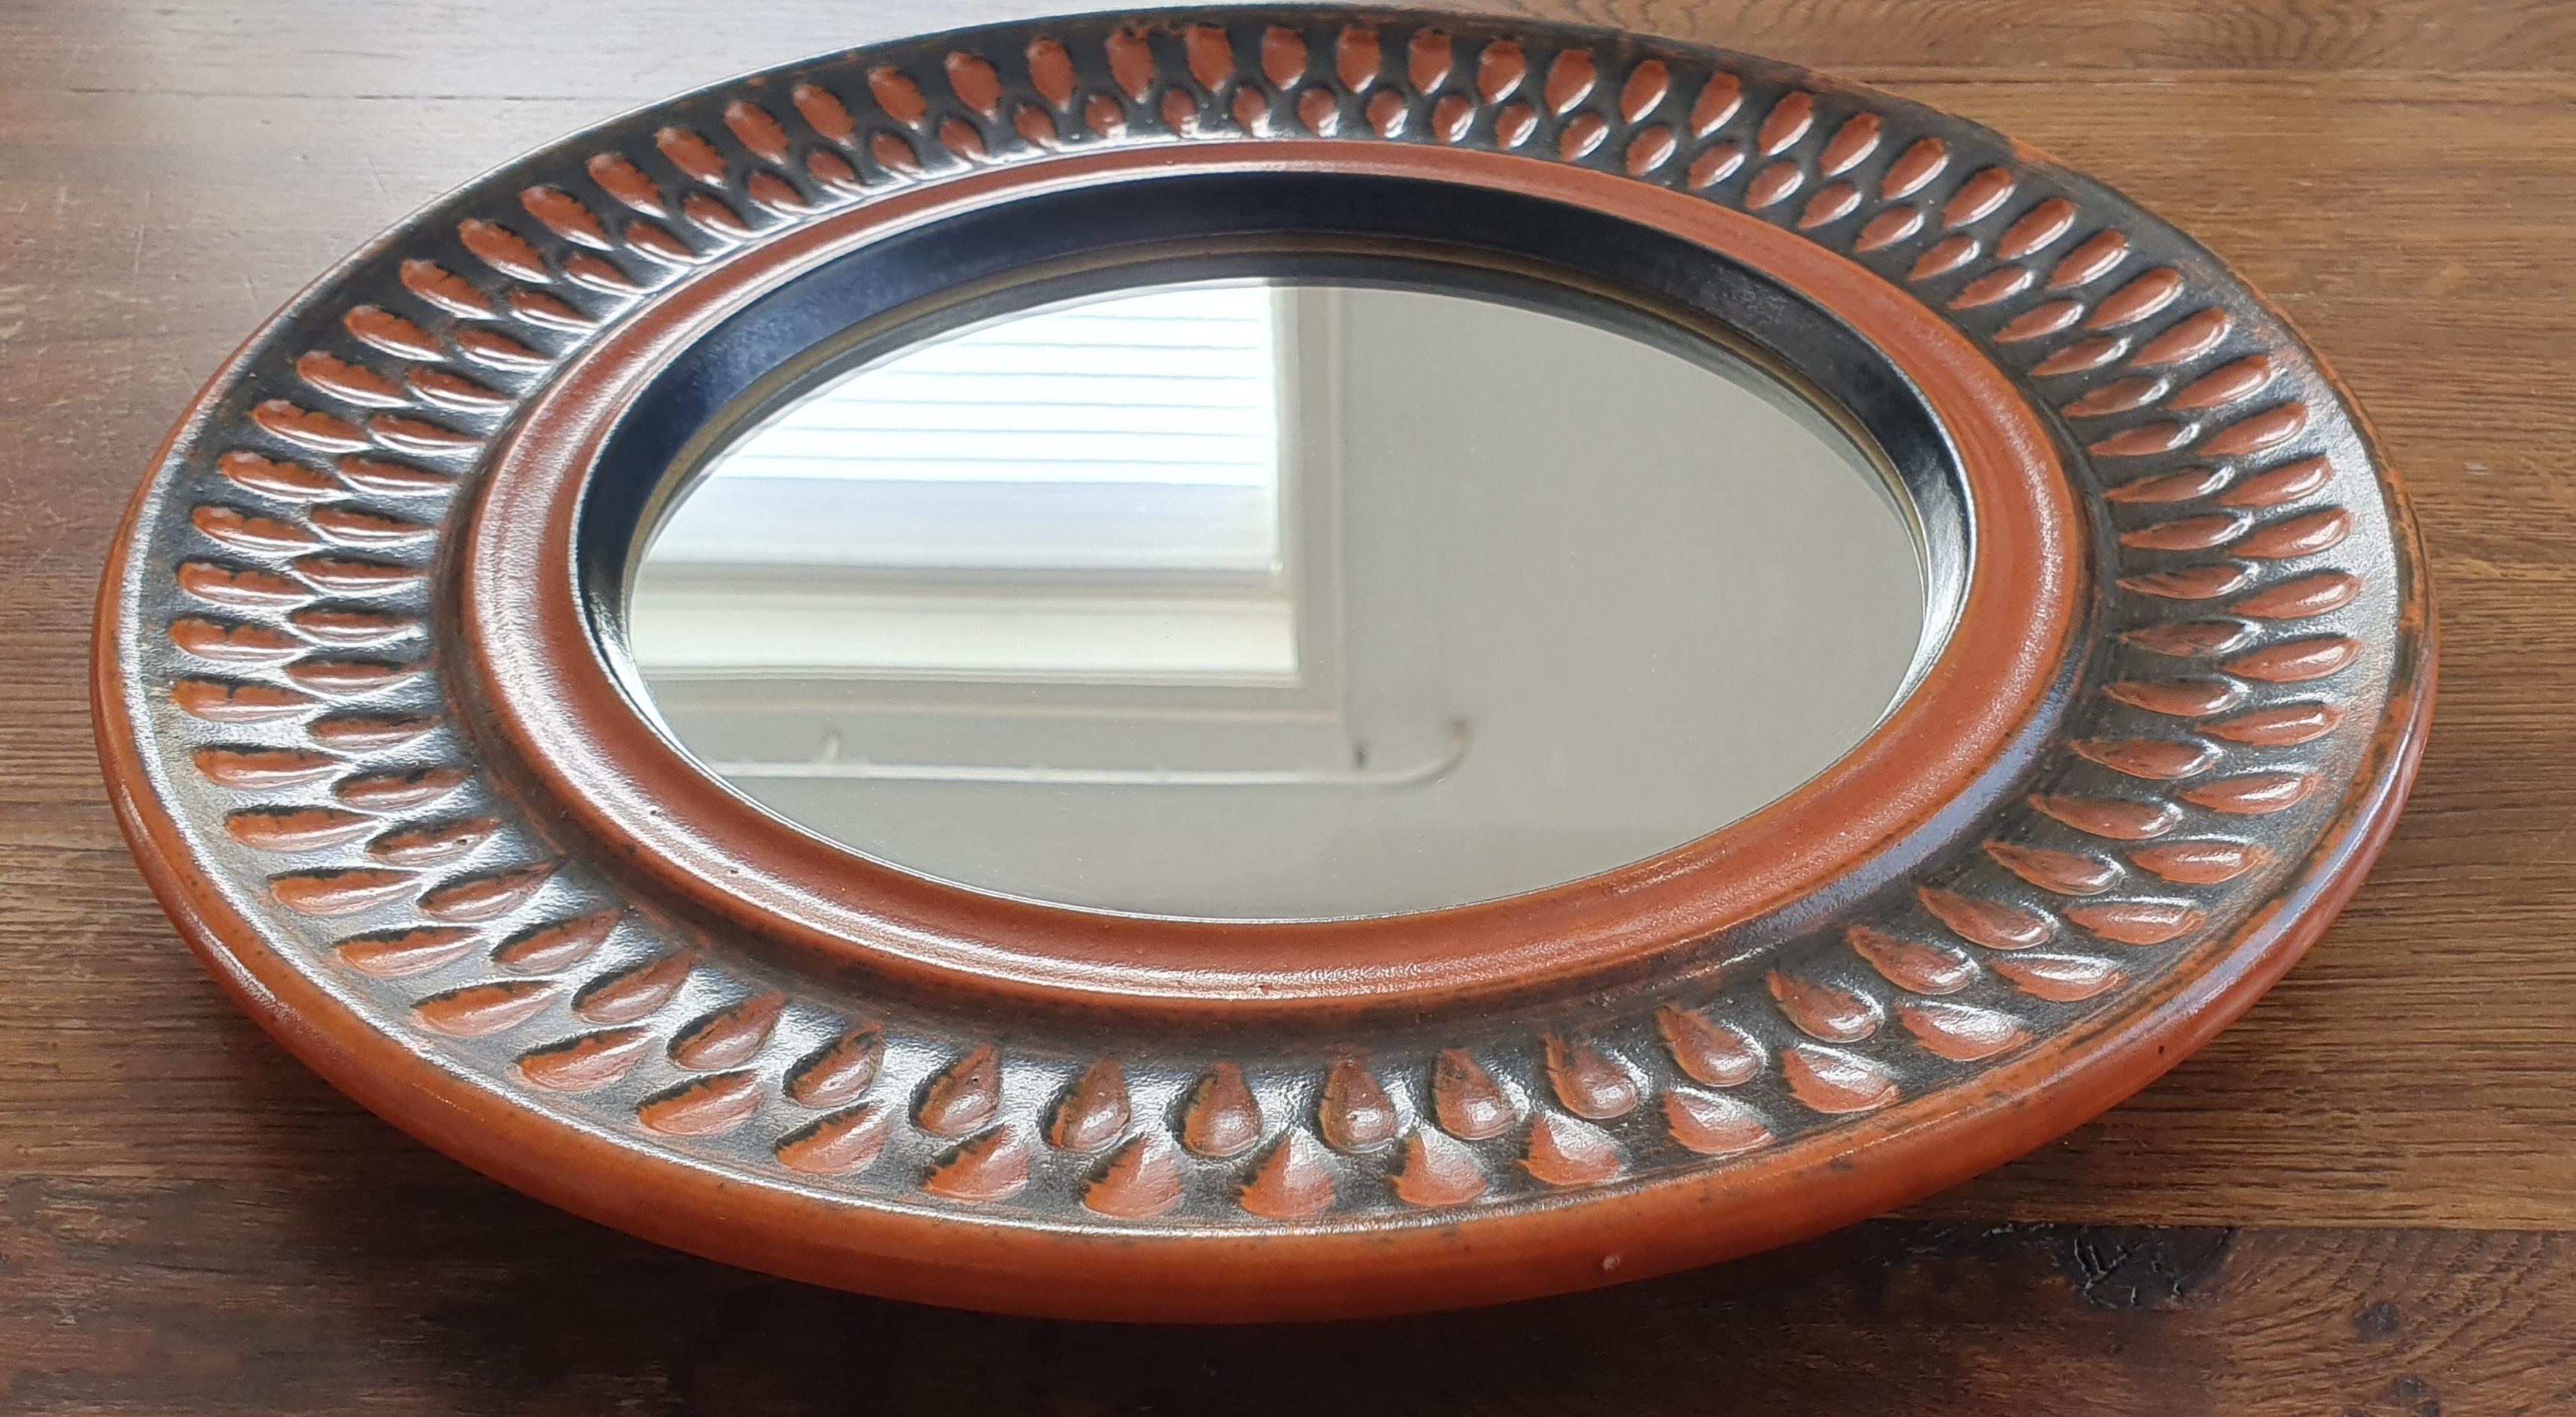 Etched round ceramic wall mirror in orange and brown glaze. In good vintage condition.